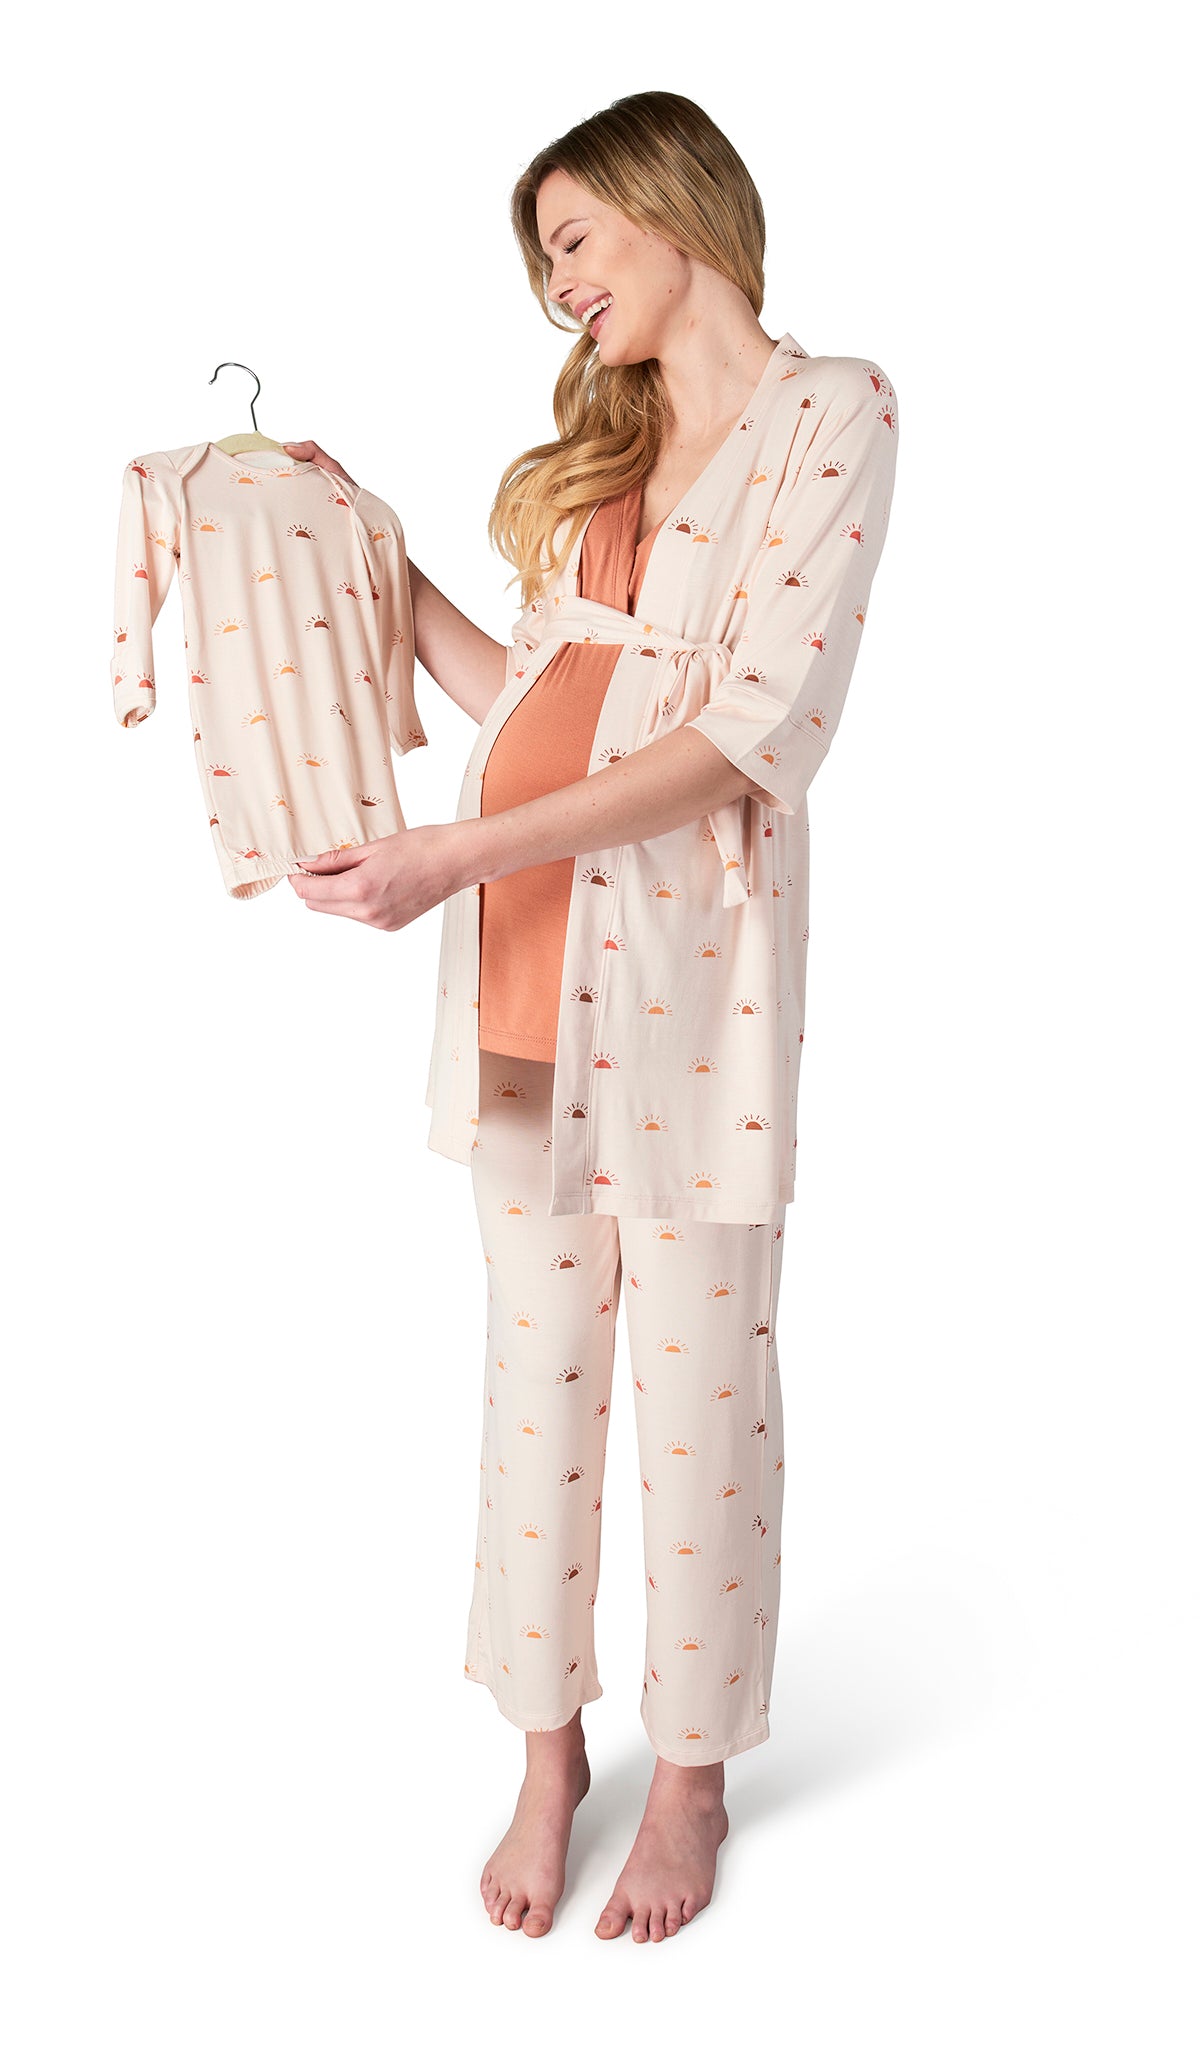 Sunrise Analise 5-Piece Set. Pregnant woman wearing 3/4 sleeve robe, tank top and pant while holding a baby gown.